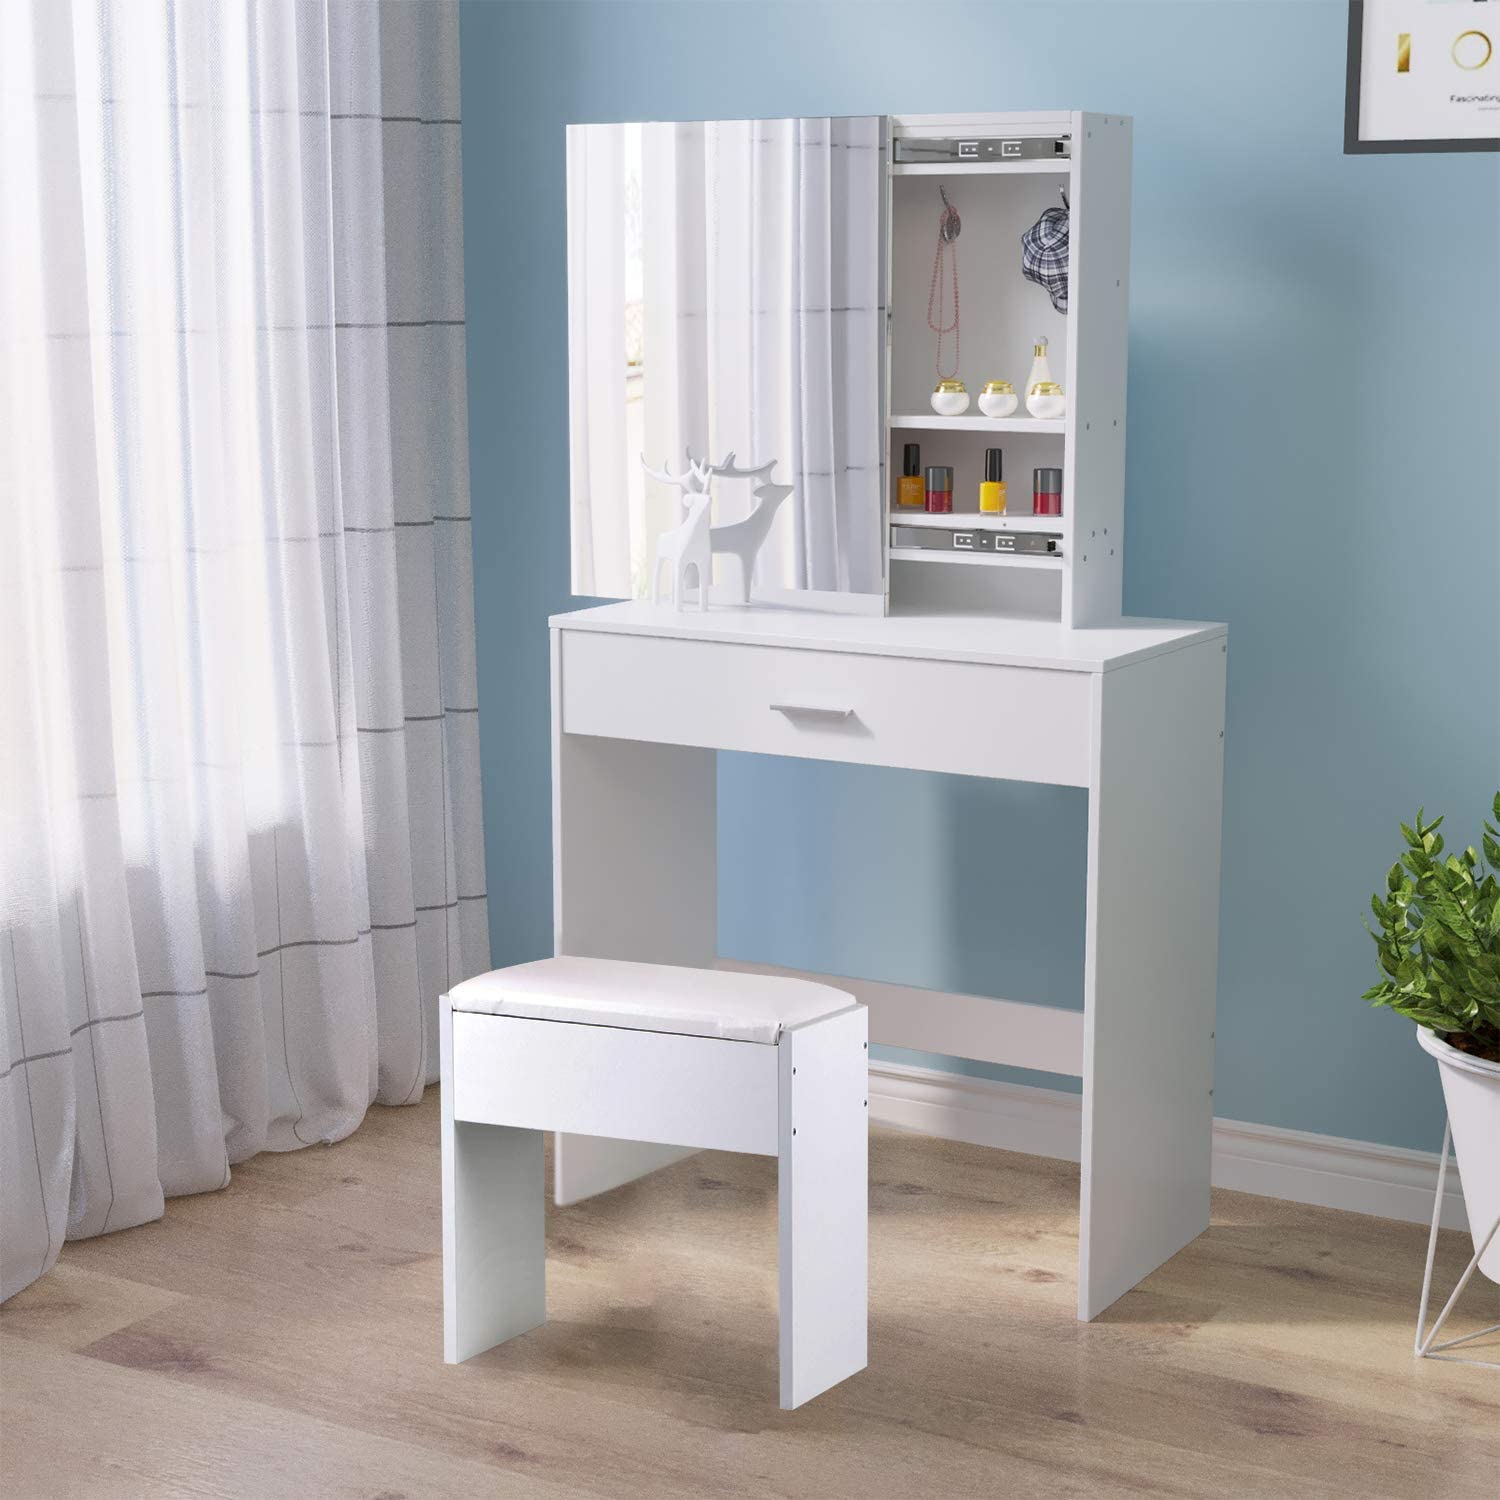 White dressing table with movable mirror, drawer, stool